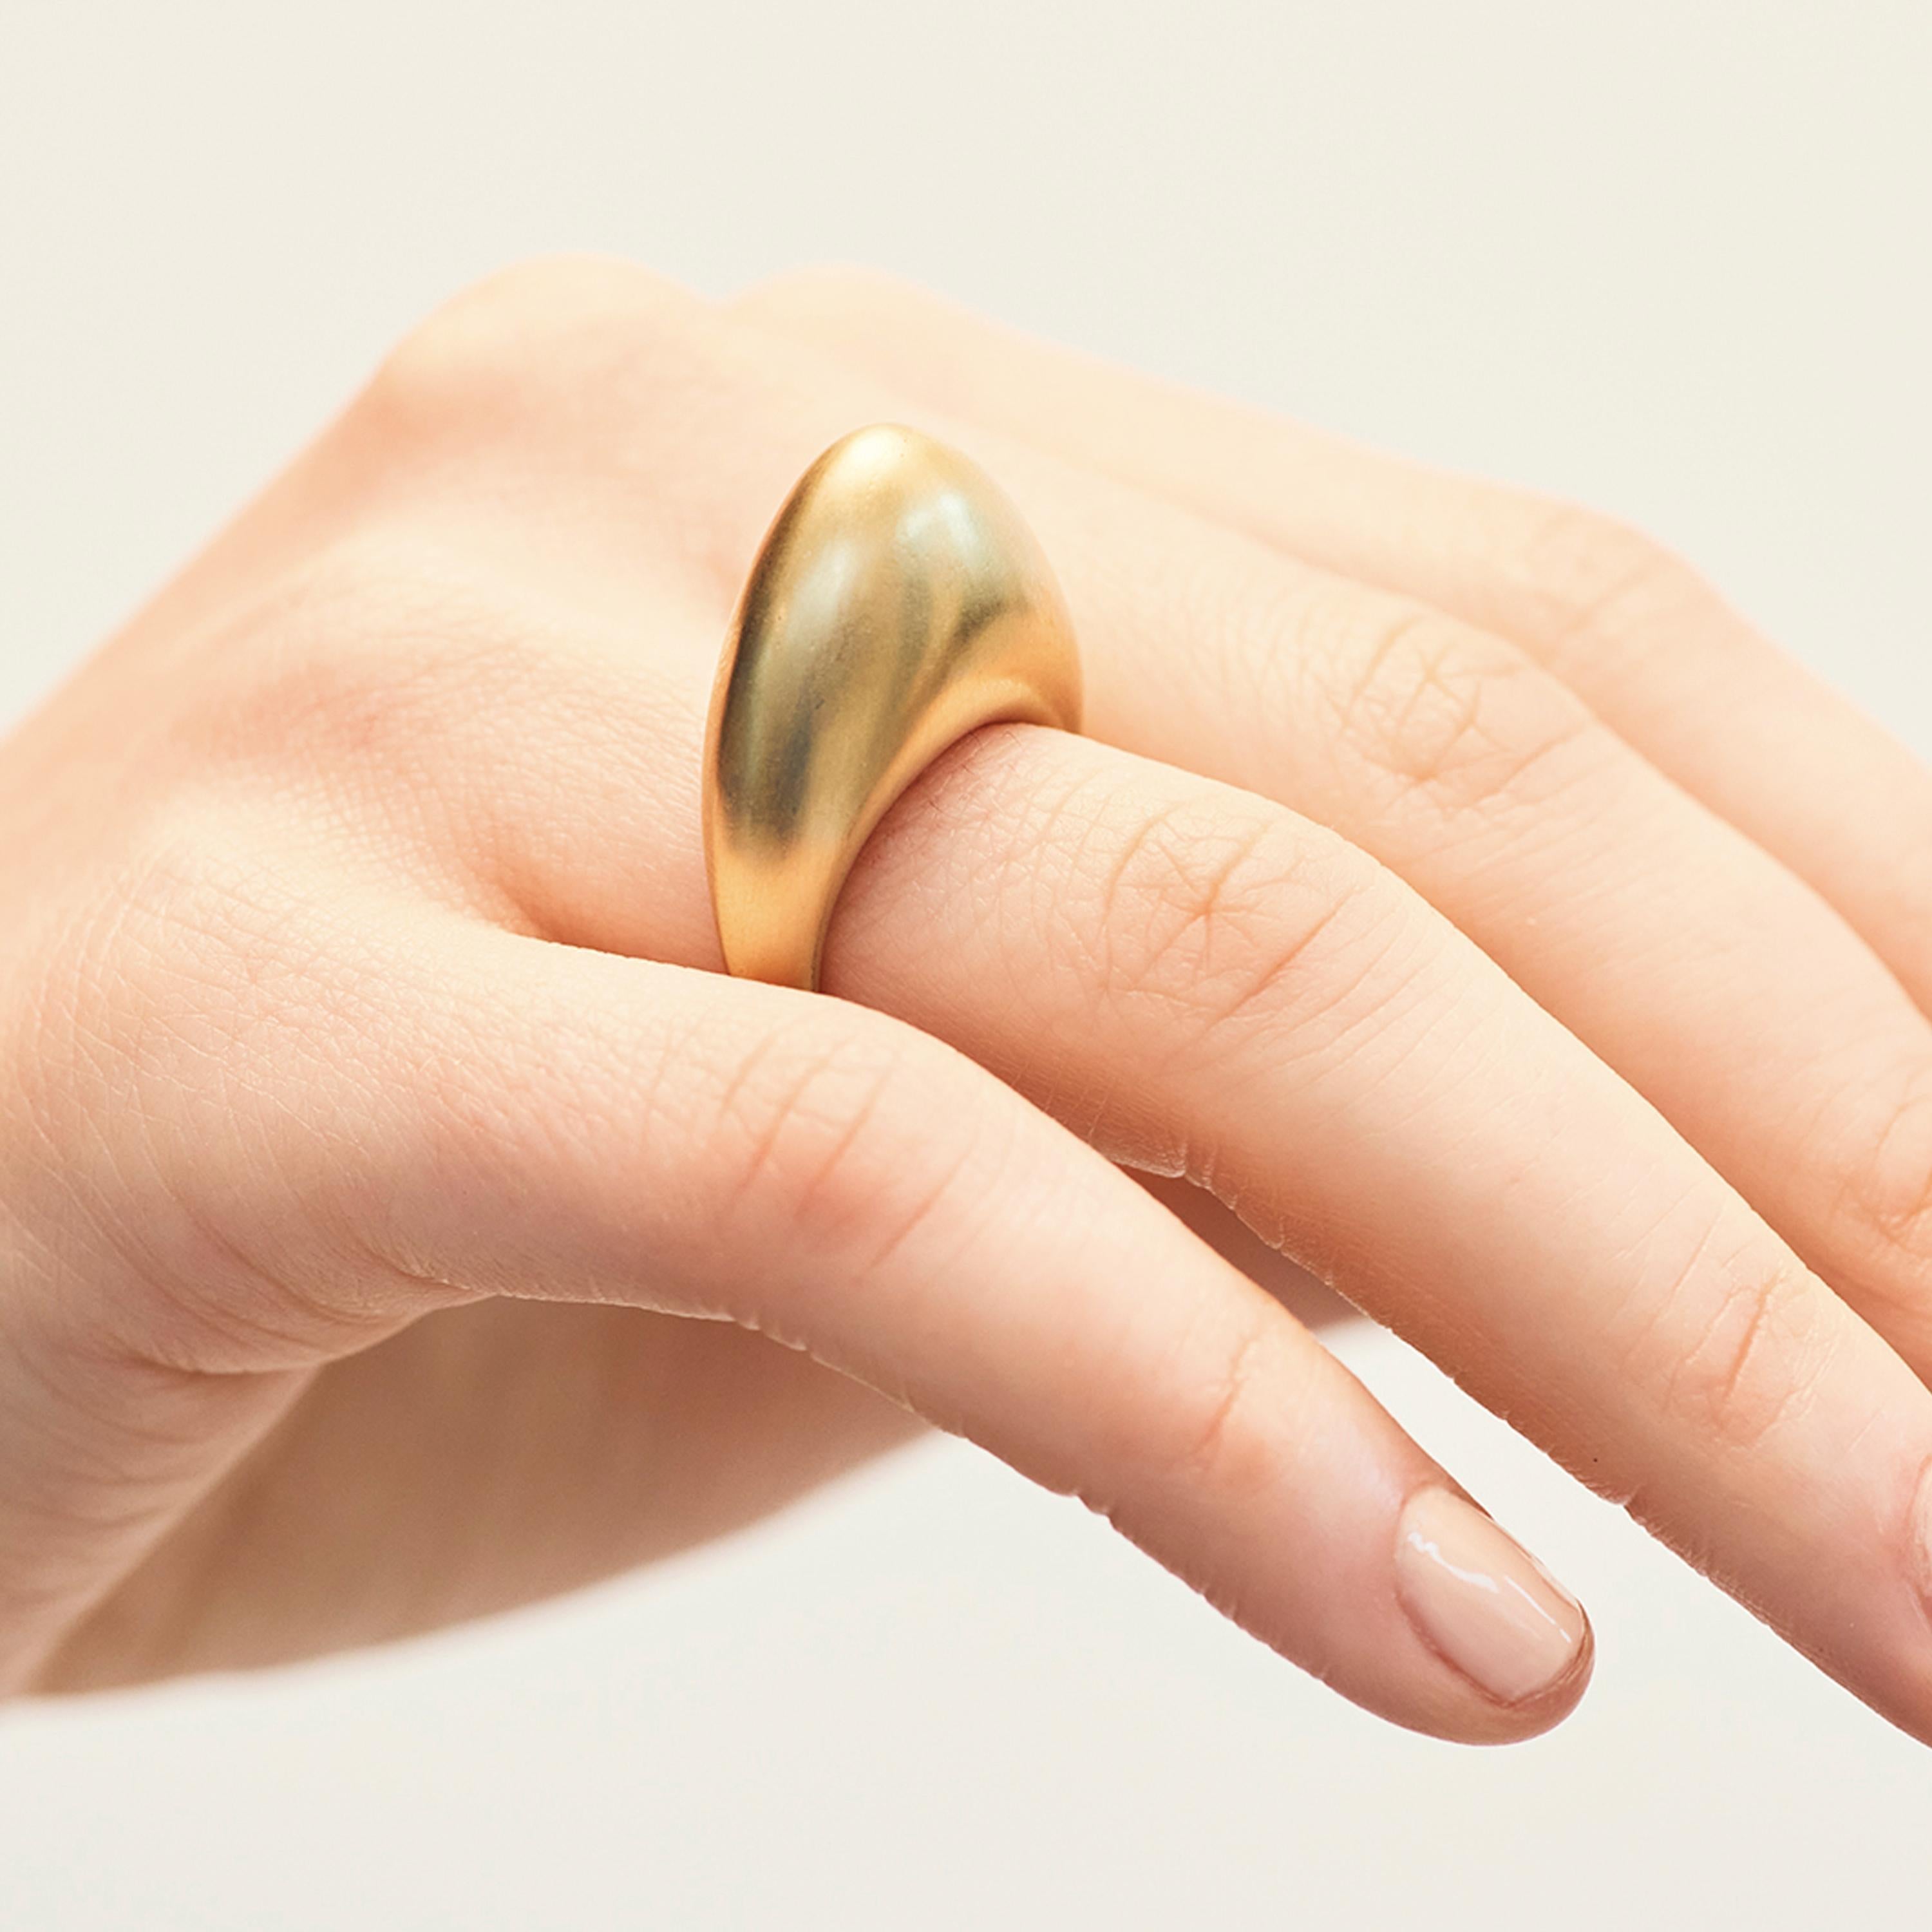 Subtle and sophisticated in its design, Nada Ghazal’s Fuse Rock ring is crafted from 18 karat yellow gold with a brushed finish. The ring is also available in yellow gold and white gold.

While Nada Ghazal's pieces are in essence deeply personal,